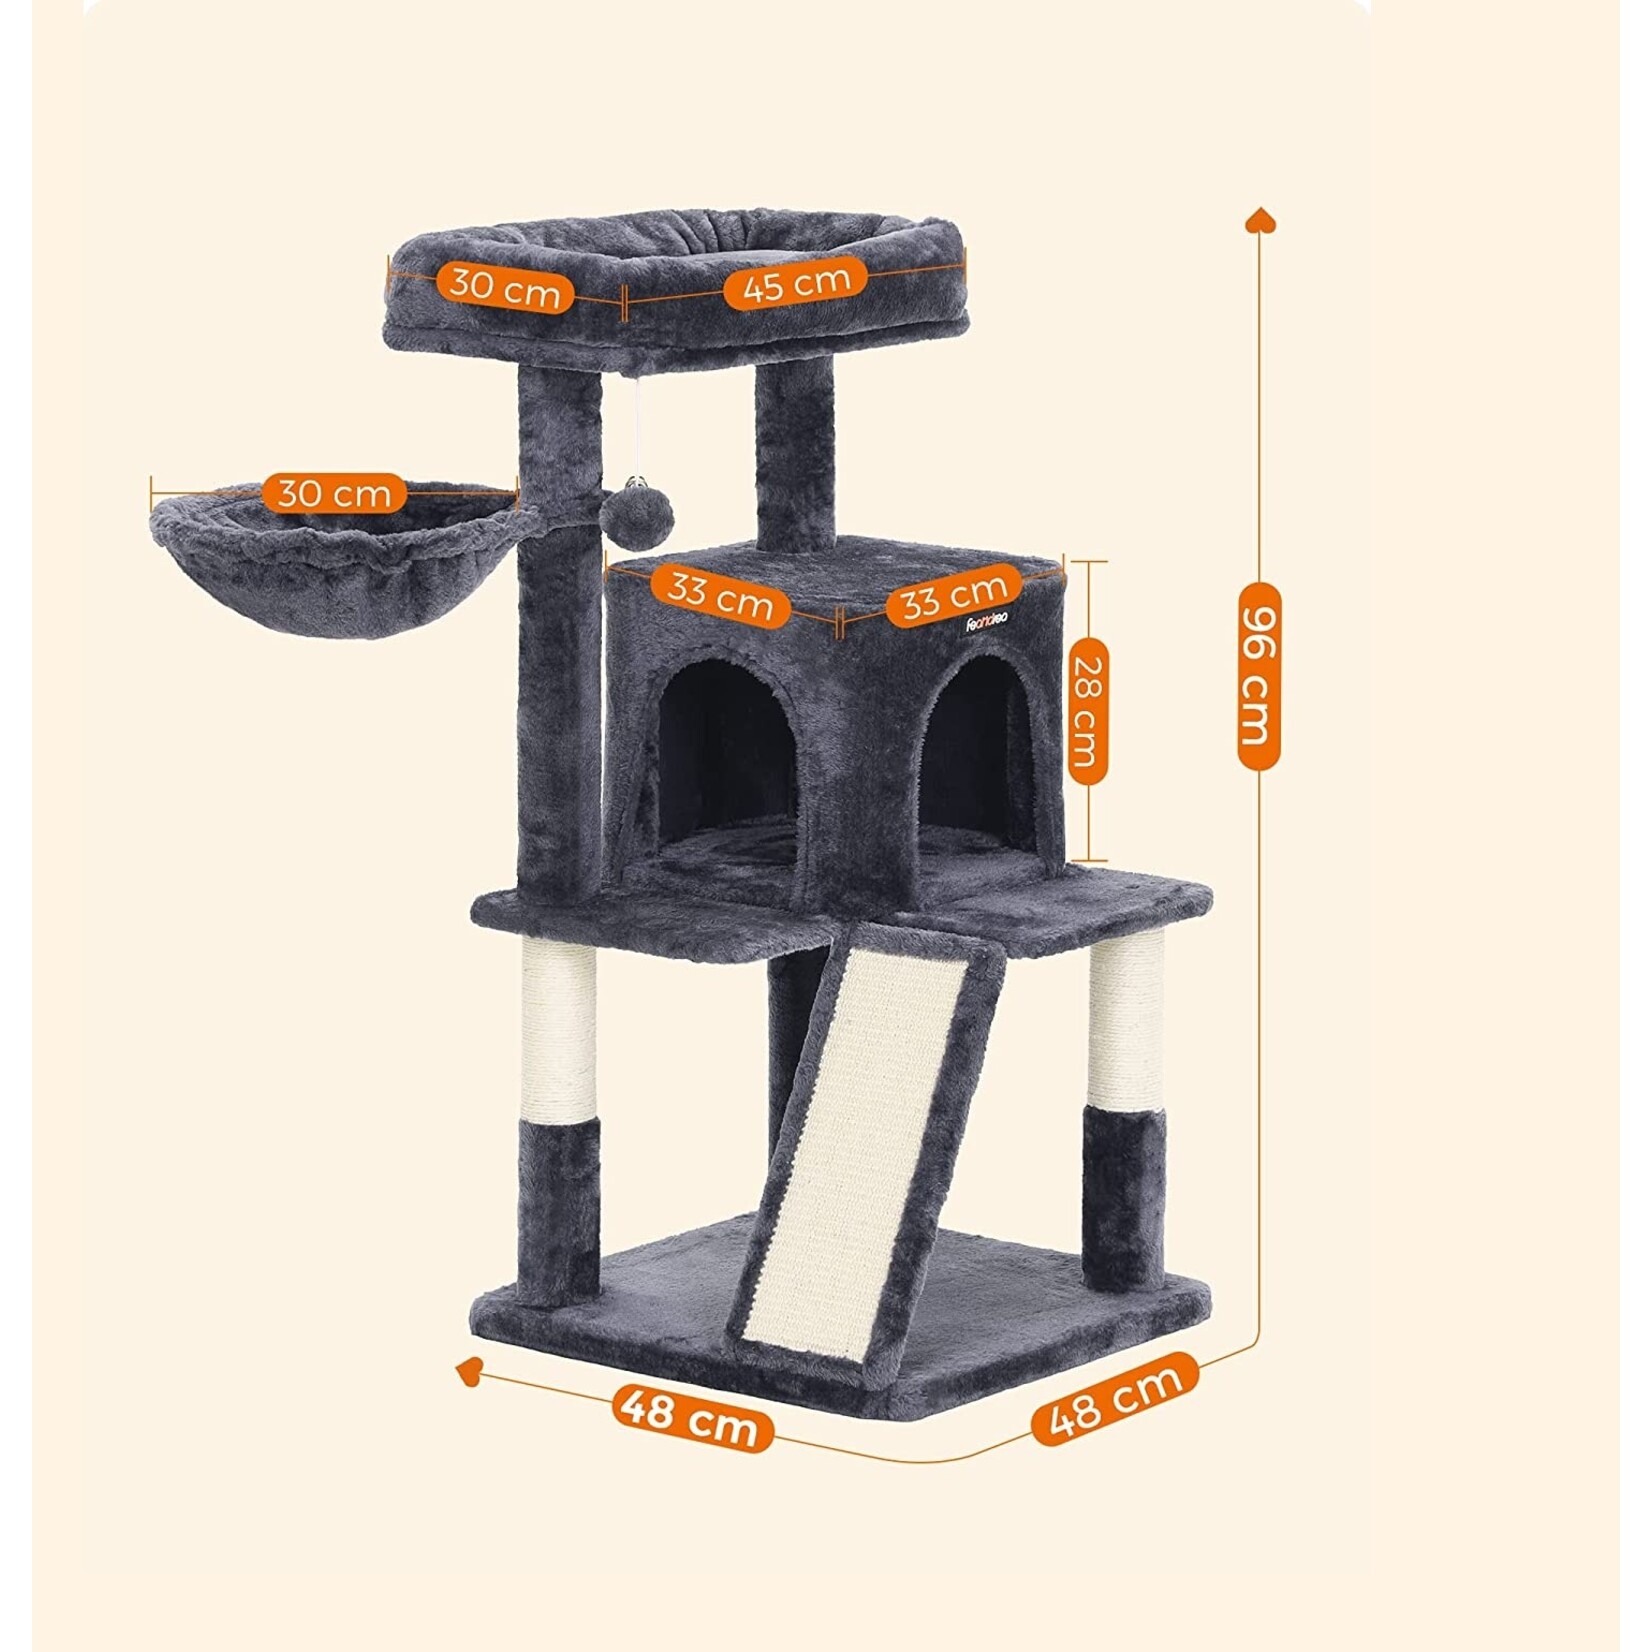 Bobbel Home Bobbel Home - Stable Scratching Post - Incl. Viewing Platforms - Cave - Scratching Board - Climbing Tree - Dark Grey